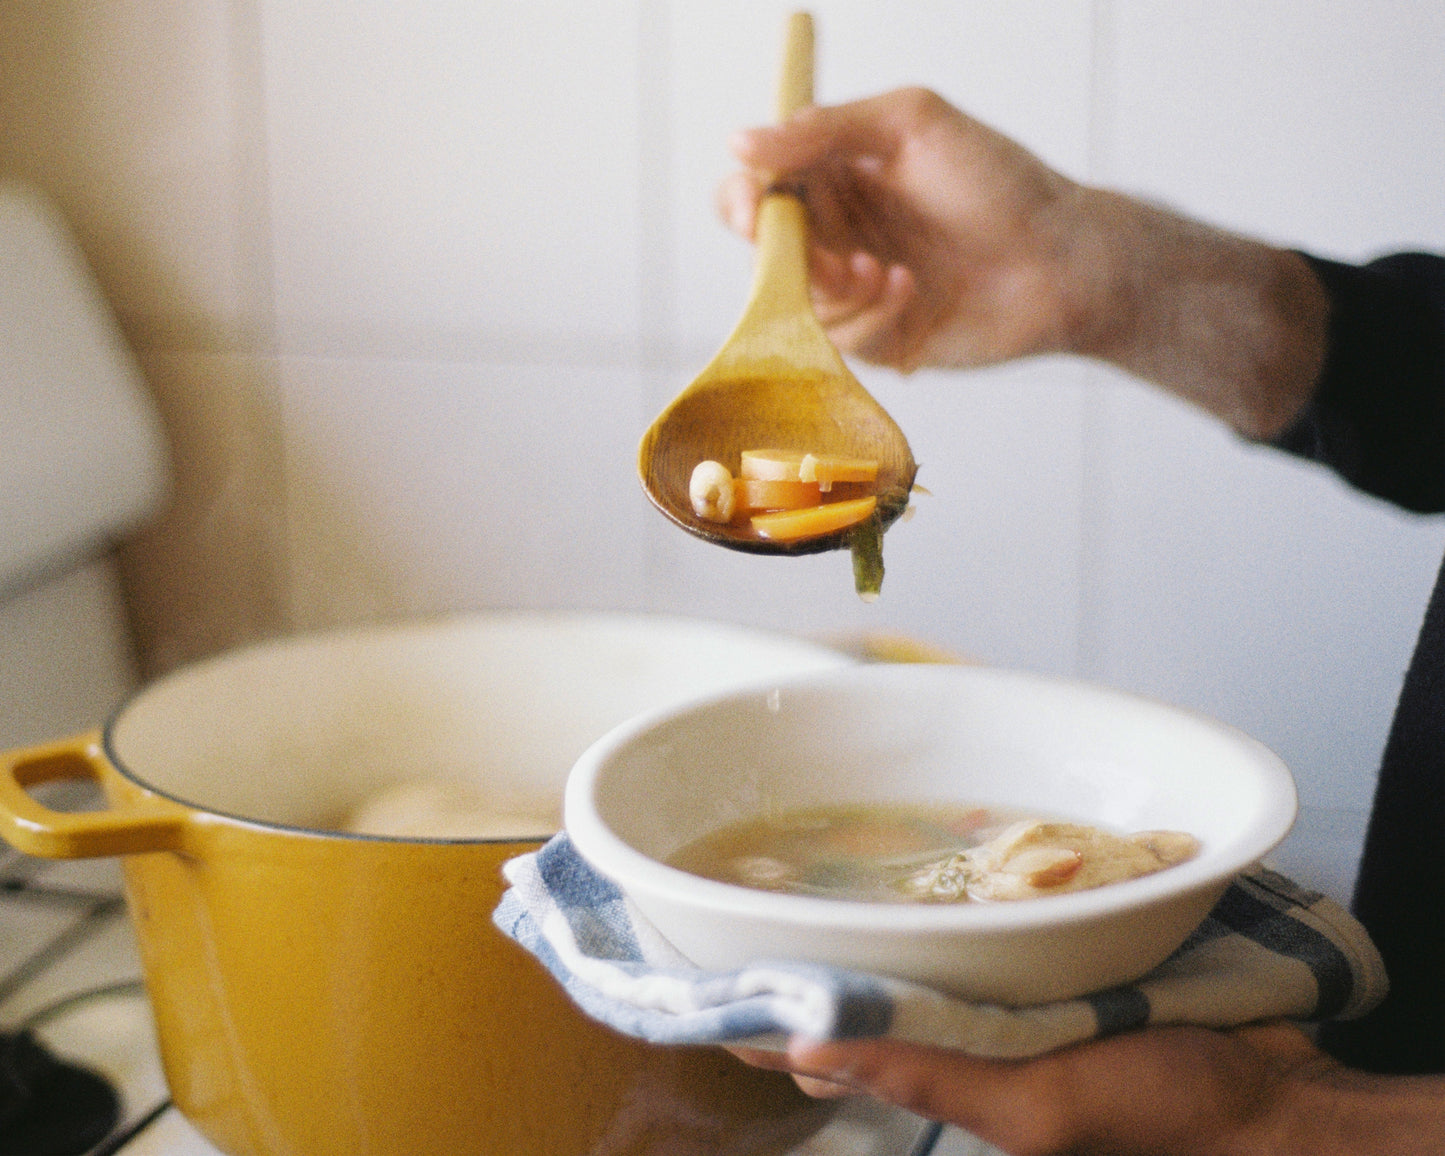 Man scooping herbal soup into a bowl from pot on stove in the kitchen